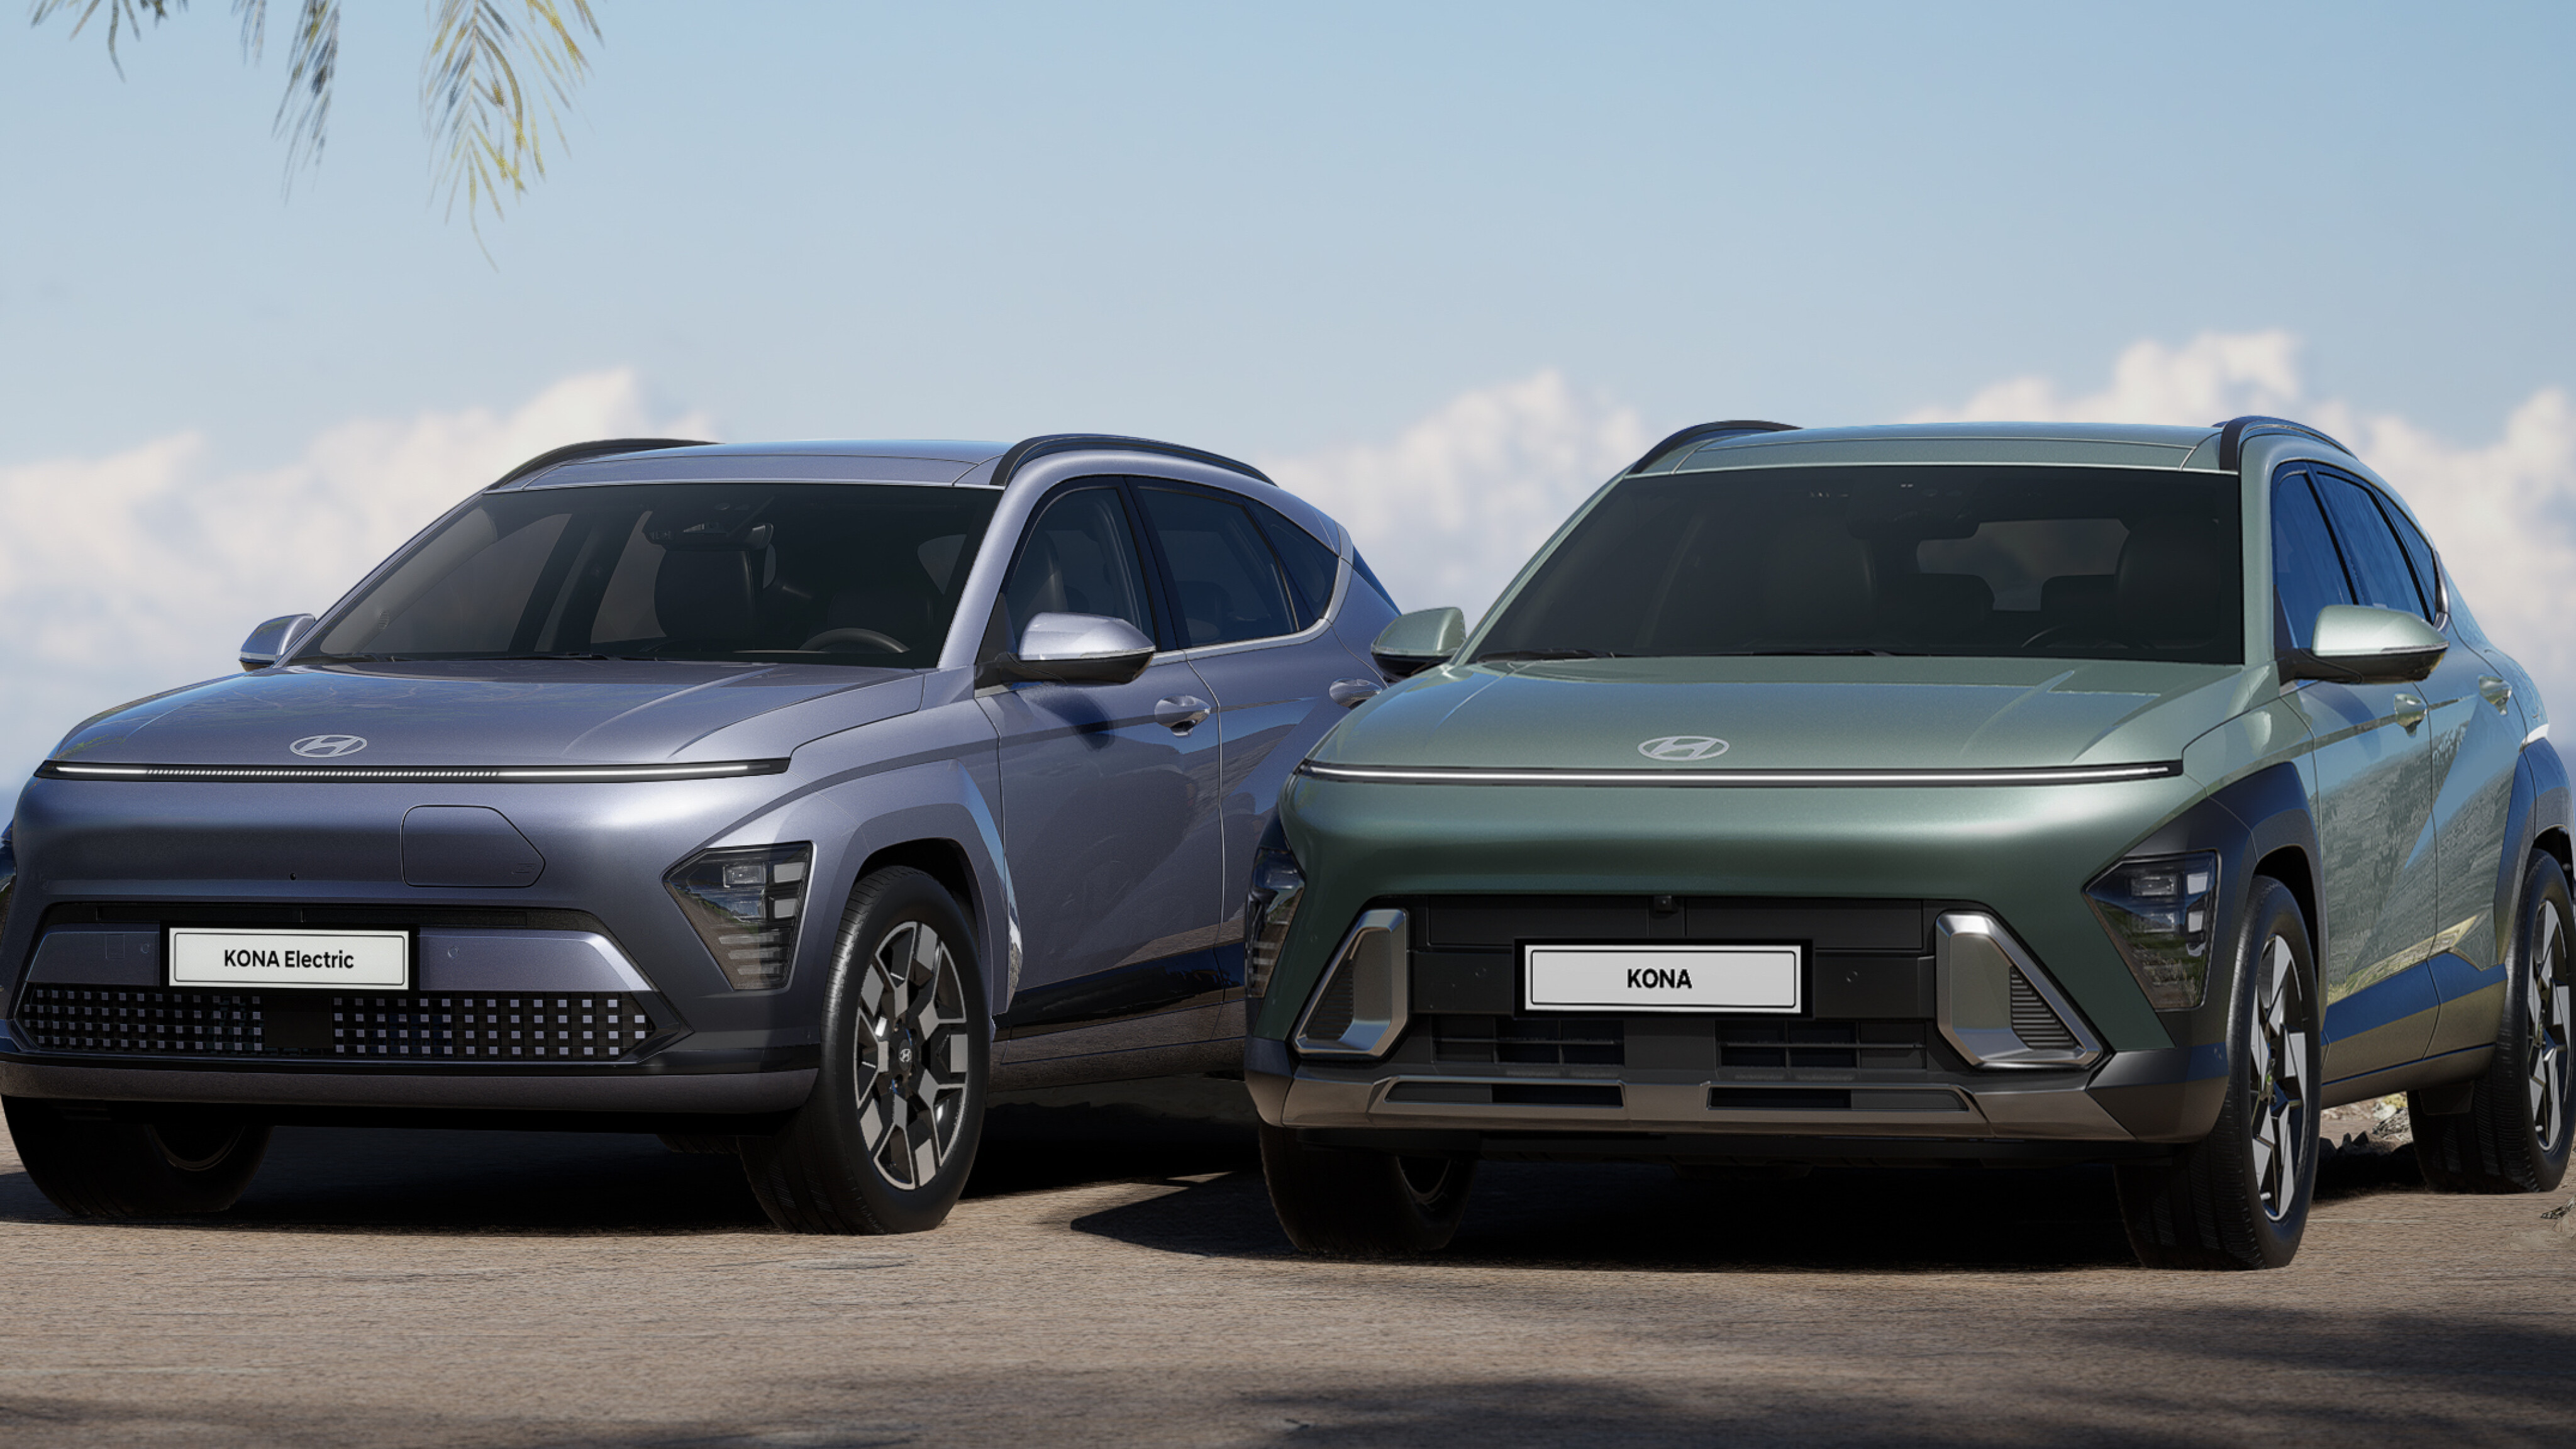 All-new 2023 Hyundai Kona launched: EV model pricing revealed